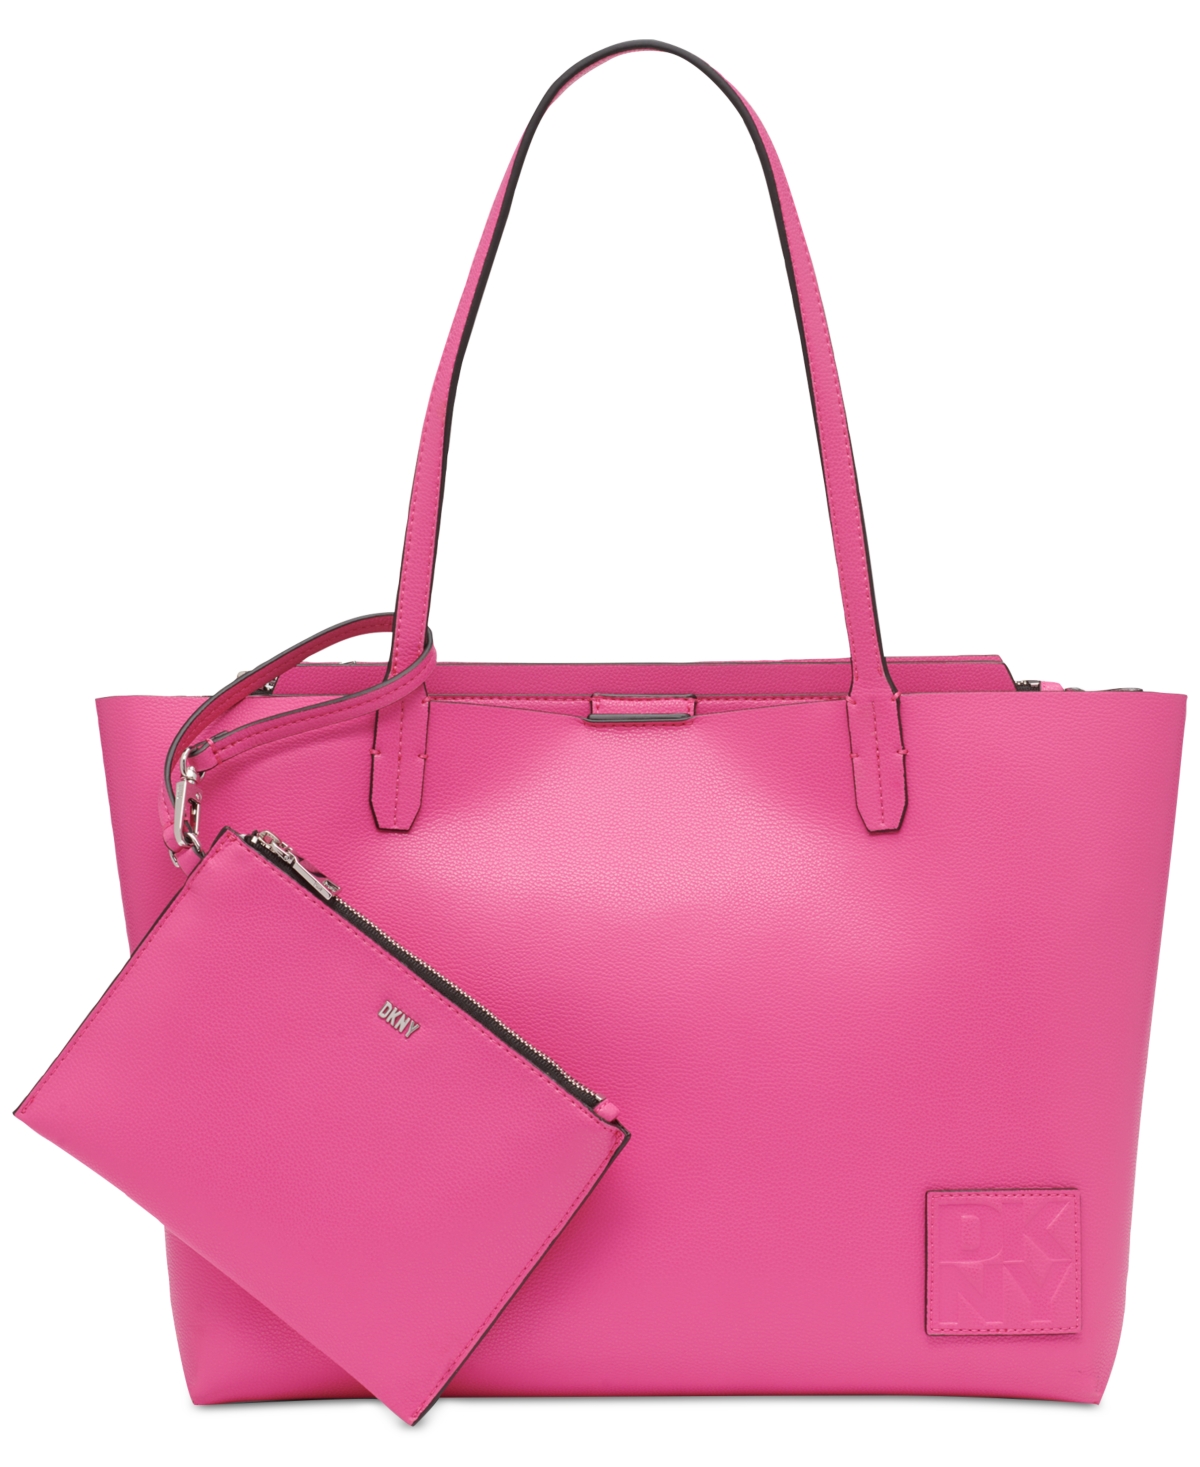 Dkny Riley Tote In Hot Pink